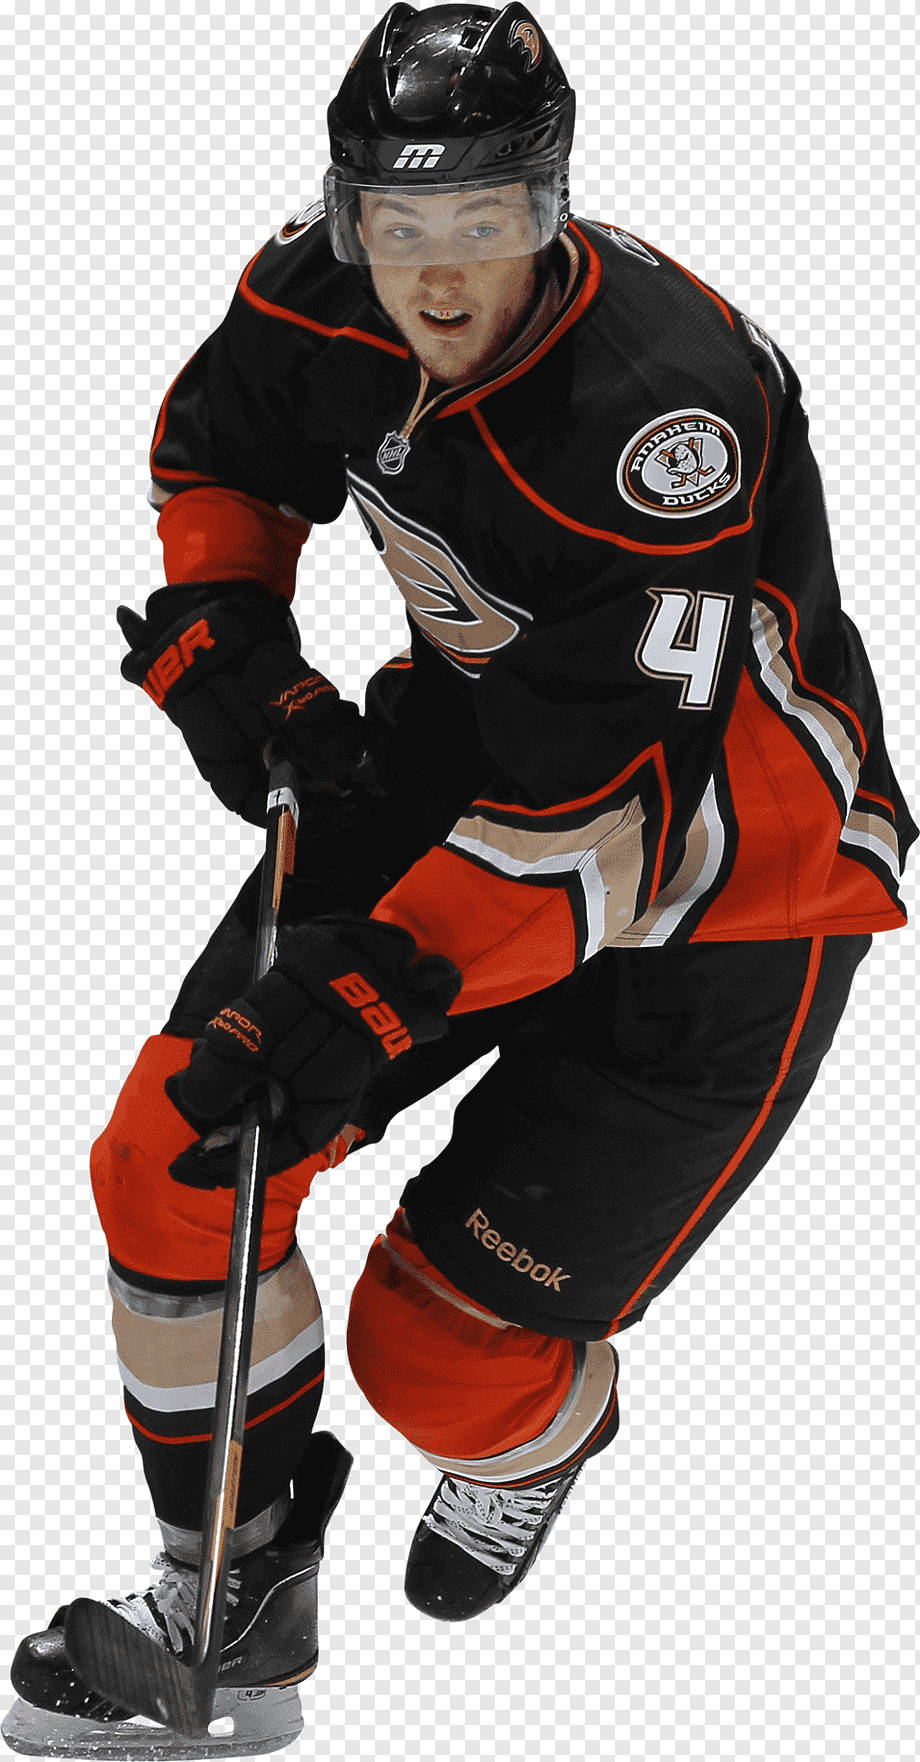 Anaheimducks Cameron Fowler Is Not A Complete Sentence And Doesn't Provide Enough Context To Accurately Translate. Can You Provide A Complete Sentence Or More Information? Wallpaper